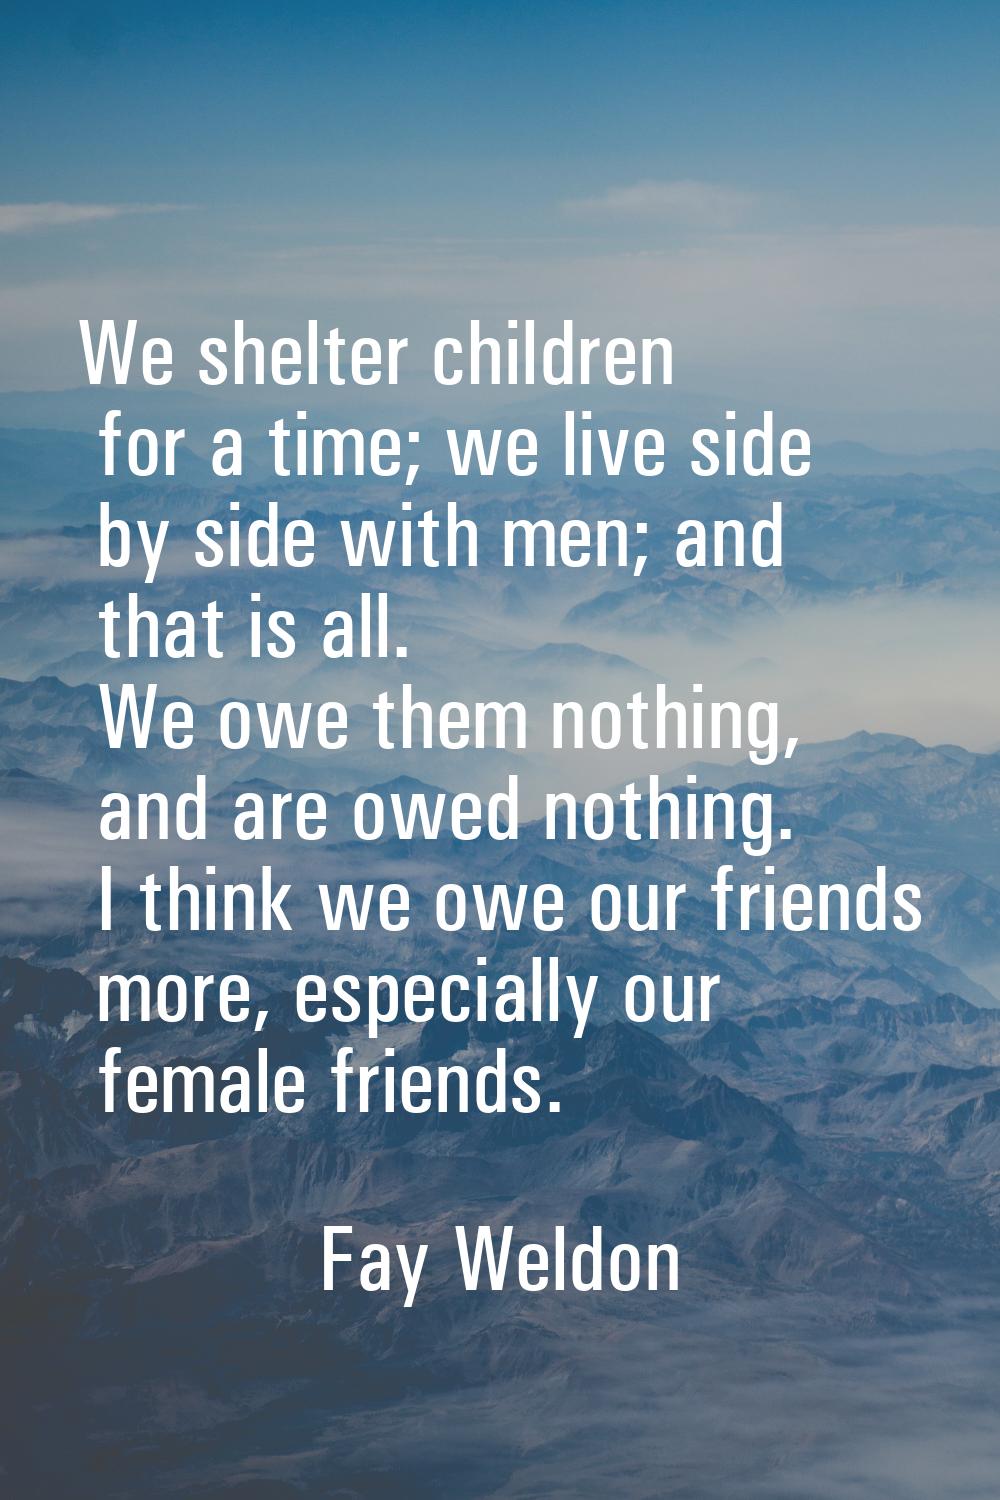 We shelter children for a time; we live side by side with men; and that is all. We owe them nothing